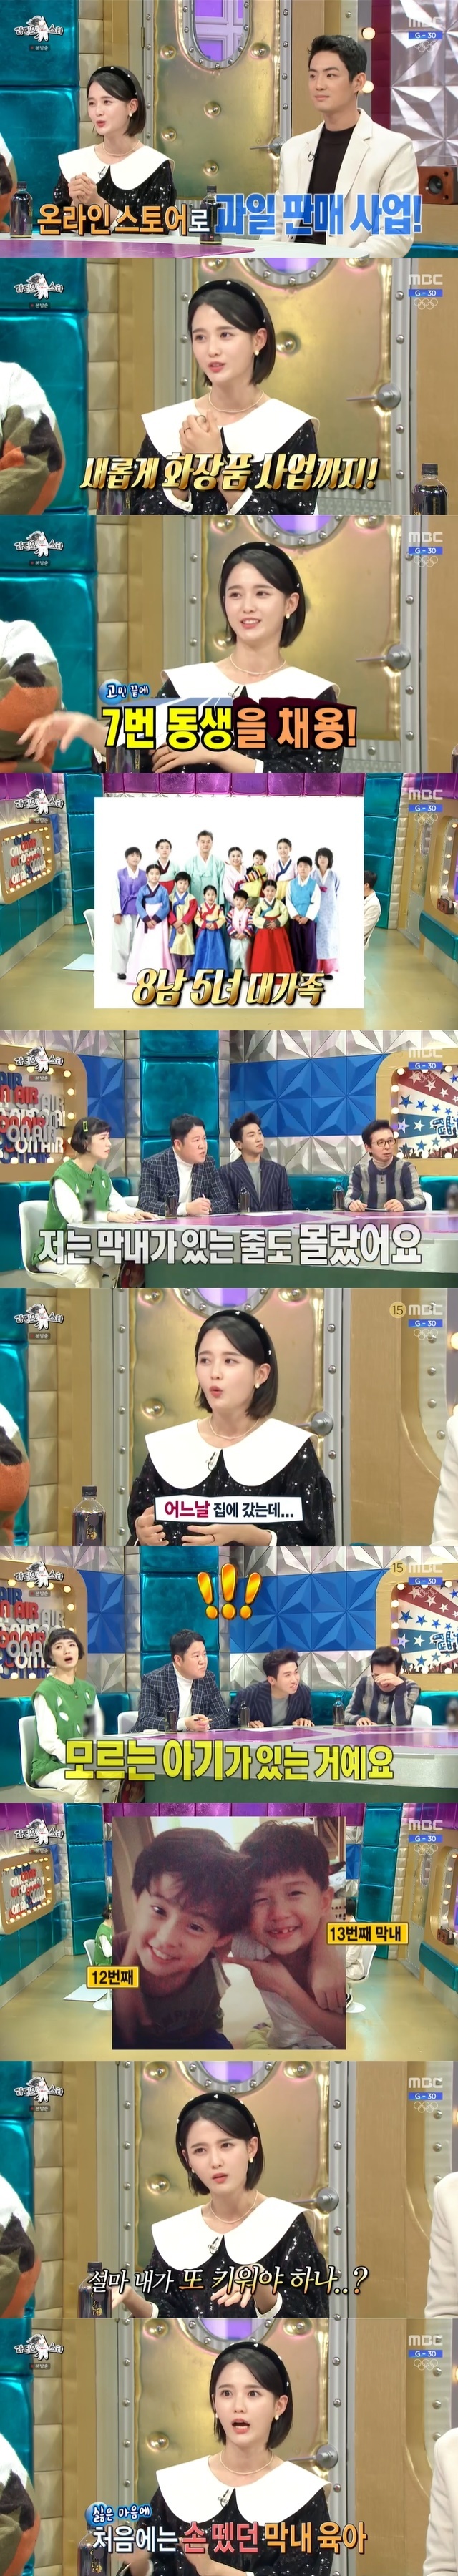 13 Brother and Sisters eldest daughter and actor Nam Bo-ra has spoken out about her family.In the 752nd MBC entertainment program Radio Star broadcasted on January 5, 2022 player entry!Actor Nam Bo-ra appeared as a guest with Seo Jang-hoon, Yoo Min-sang and Koo Ja-wook.It was a dream to do business since I was a child, said Nam Bo-ra.We have been selling fruits as a small online store to start our business this year, and now we have launched a new cosmetics brand. We have one employee now, said Nam Bo-ra. We were so busy and busy in the first half of the year, so we were worried about who to hire, and we hired our seventh brother because we were hit by our feet.Nam Bo-ra said, I have a good sense of responsibility and I am perfectly handled if I work, he said. I can not escape because I am tied up with my family.The brotherhood of Nam Bo-ra is 8 boys and 5 girls. Nam Bo-ra was the eldest of them.Nam Bo-ra explained that her mother, who was 65 years old, started (pregnancy and childbirth) at 23 and ended at 45.At the time of the birth of the last 13 children, he said he did not know his mother was pregnant.I thought my 12th brother was my last brother, and I did my best to do my best and did my best. One day I went home and there was a child I did not know. Nam Bo-ra said, I was a college student.I was confused, he said, I wanted to know who this child is, I do not want to raise it again.So, in the beginning, I completely took care of the child care, but I could not see my mother, so I was forced to join the child care and explained that I was in a hurry.Nam Bo-ra also reported that SNS DM is pouring into the eldest daughters of All States recently.Nam Bo-ra said, I recently went to Oh Eun-youngs Golden Counseling Center. I talked about my troubles as a K-girl, so all states K-girls sympathized.I almost became like the president of the K-Genesis Association. Nam Bo-ra, as he wanted to tell the K-masters of All States, shouted, Lets find our rights, were children, lets put them all down. Lets not do it.However, Ahn Young-mis Then when you call your mother, do not you go and see the baby? I laughed at the joke that I responded politely to my mothers phone immediately.On this day, Nam Bo-ra also solved various Episodes of 13 Brother and Sister large family.Nam Bo-ra said he has several family chat rooms. There is a whole chat room, a womens chat room, and a work chat room.Im told that I paid a monthly rent because I live with them, he said.I have two cars at home, two cars at my car, and two cars at my dad. I used to have three cars.So, as a basketball player, Seo Jang-hoon, a group life experiencer, said, There are 12 professional basketball team entries, so it is more than basketball team.Nam Bo-ra said that the instincts of K-girls are also crazy about love, When I make a boyfriend, there is something that pops out without knowing it.It comes out when youre fighting your boyfriend. You did this, you didnt. No, you didnt. Right. Answer me. No? Dont. Im coming.(Also) I have to do my sisters Bob Care at dinner because my sisters care is number one. I have to prepare and come out.Ill cook my sisters and go out. When I was young, my boyfriends hated it.